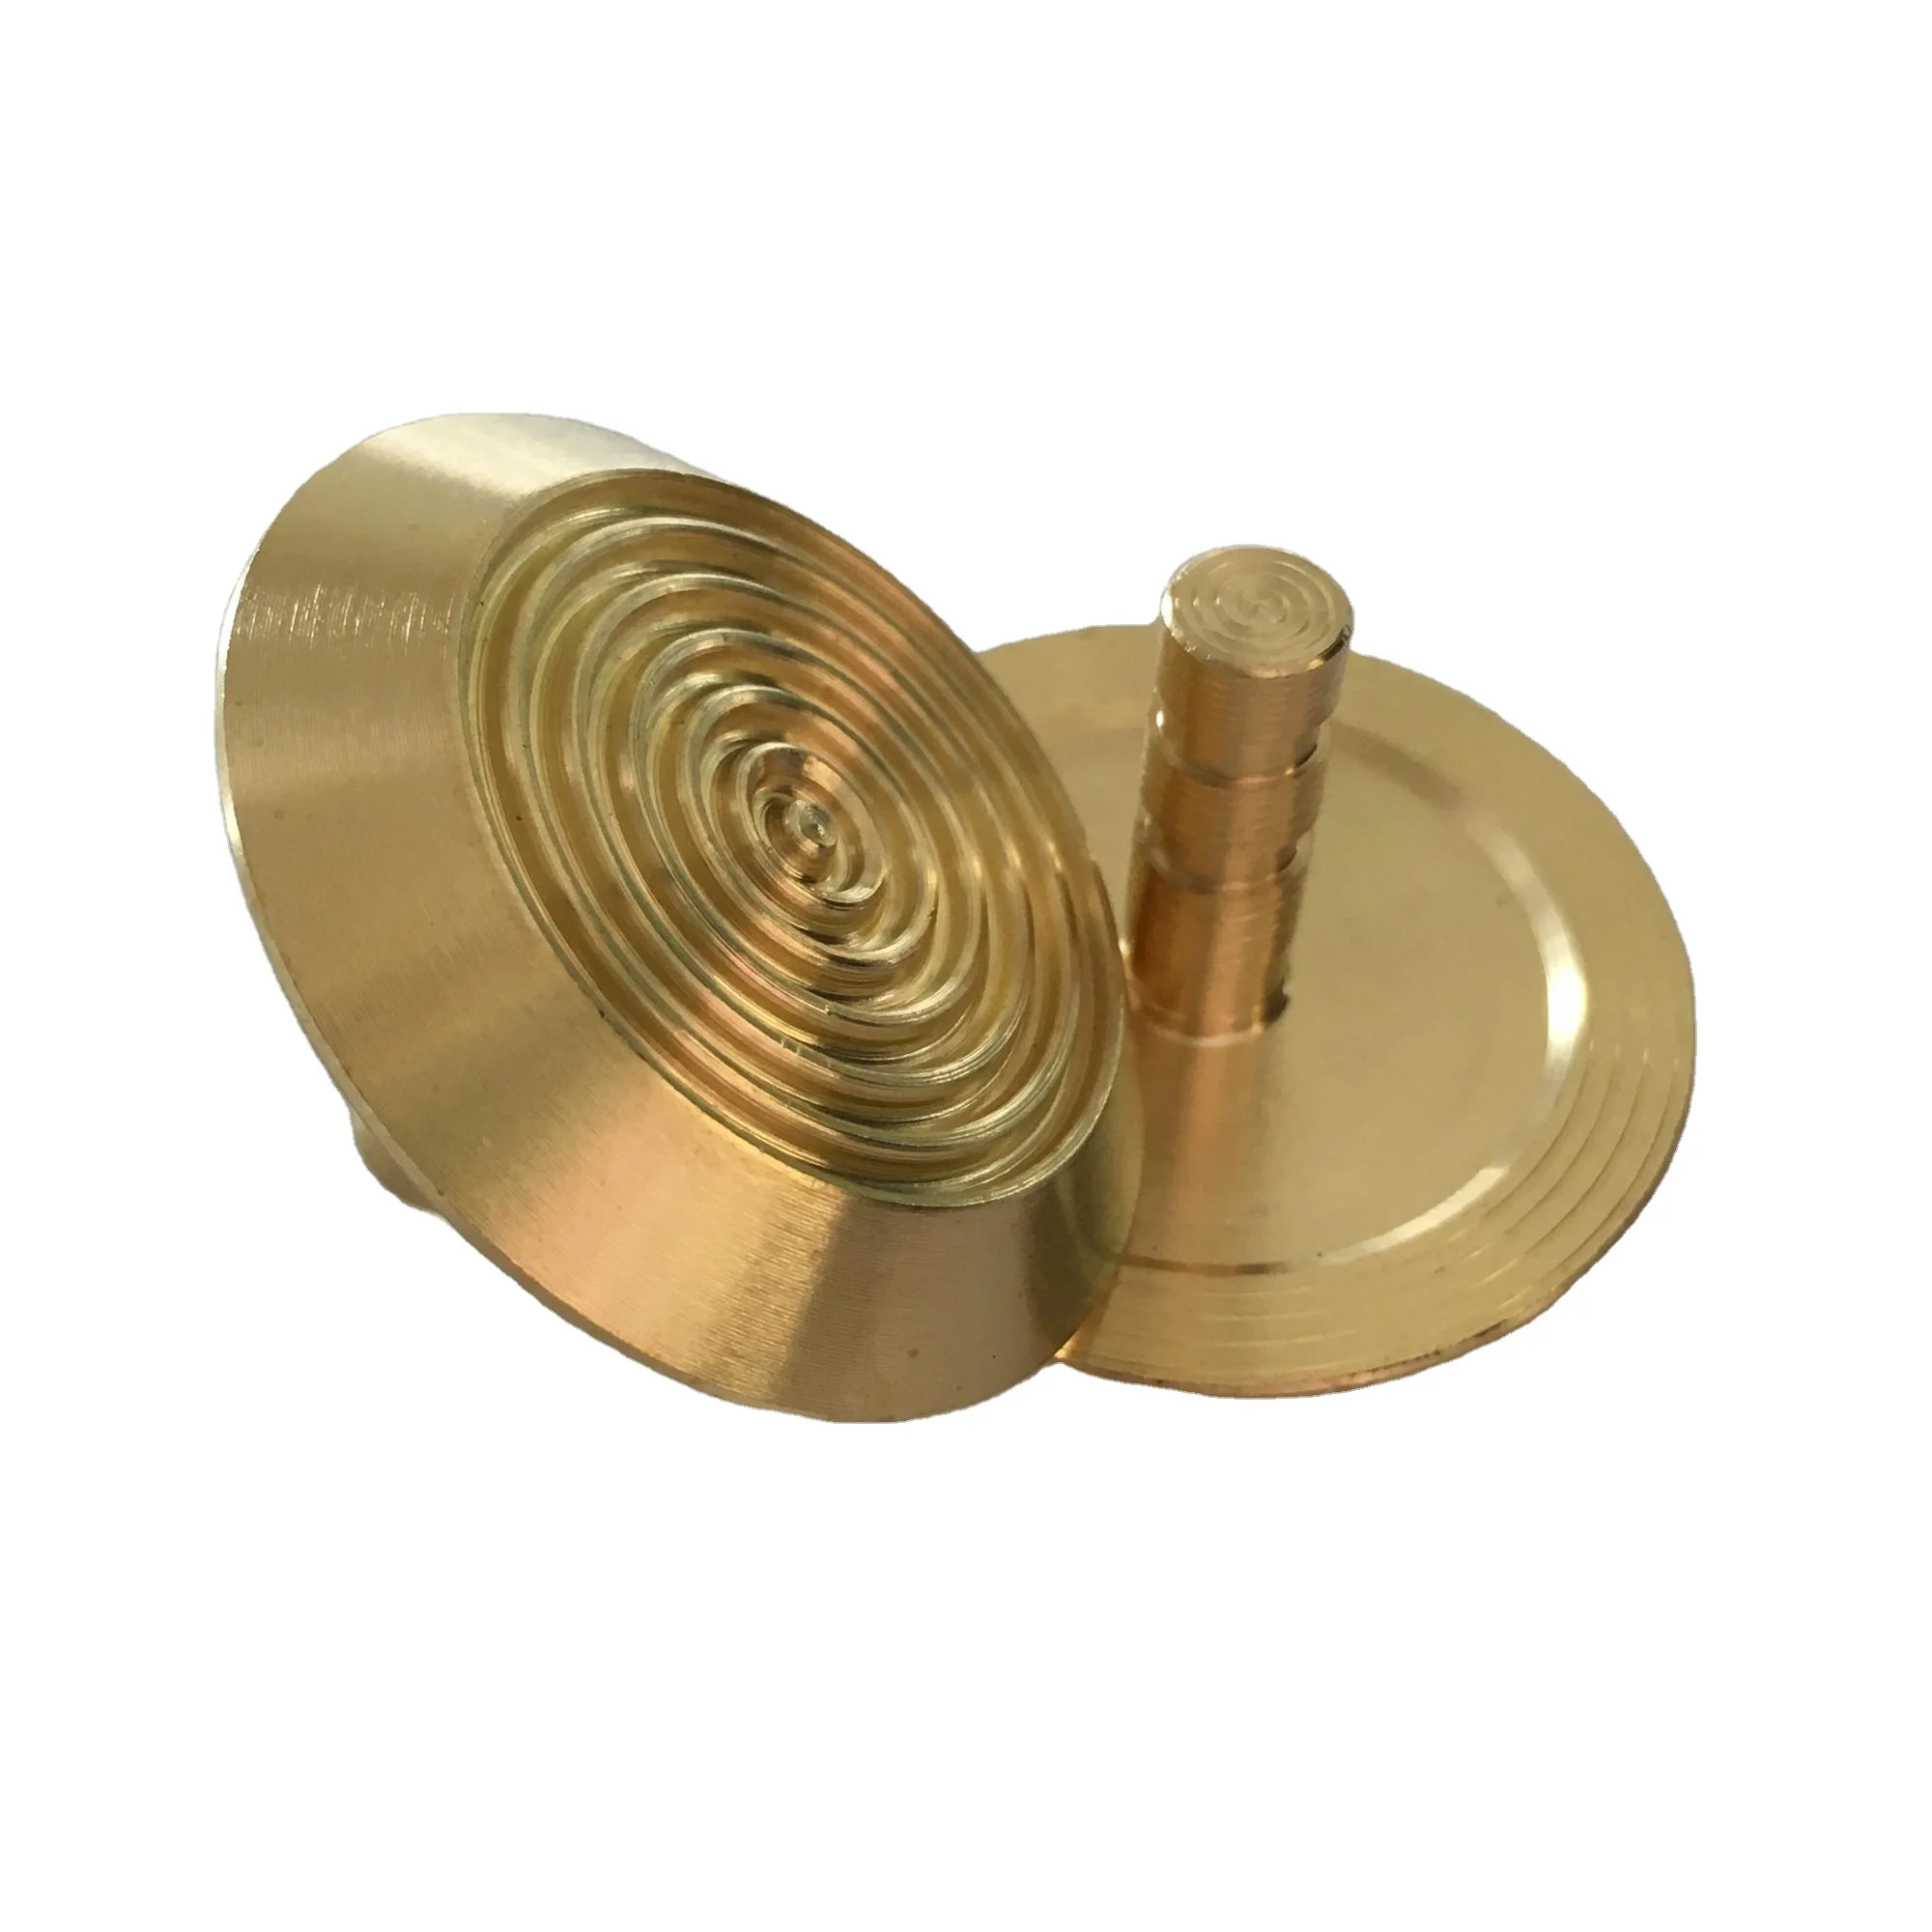 thespian Delegeret Sygdom Source brass warning studs paving studs tactile studs concentric circles  TGSI on m.alibaba.com